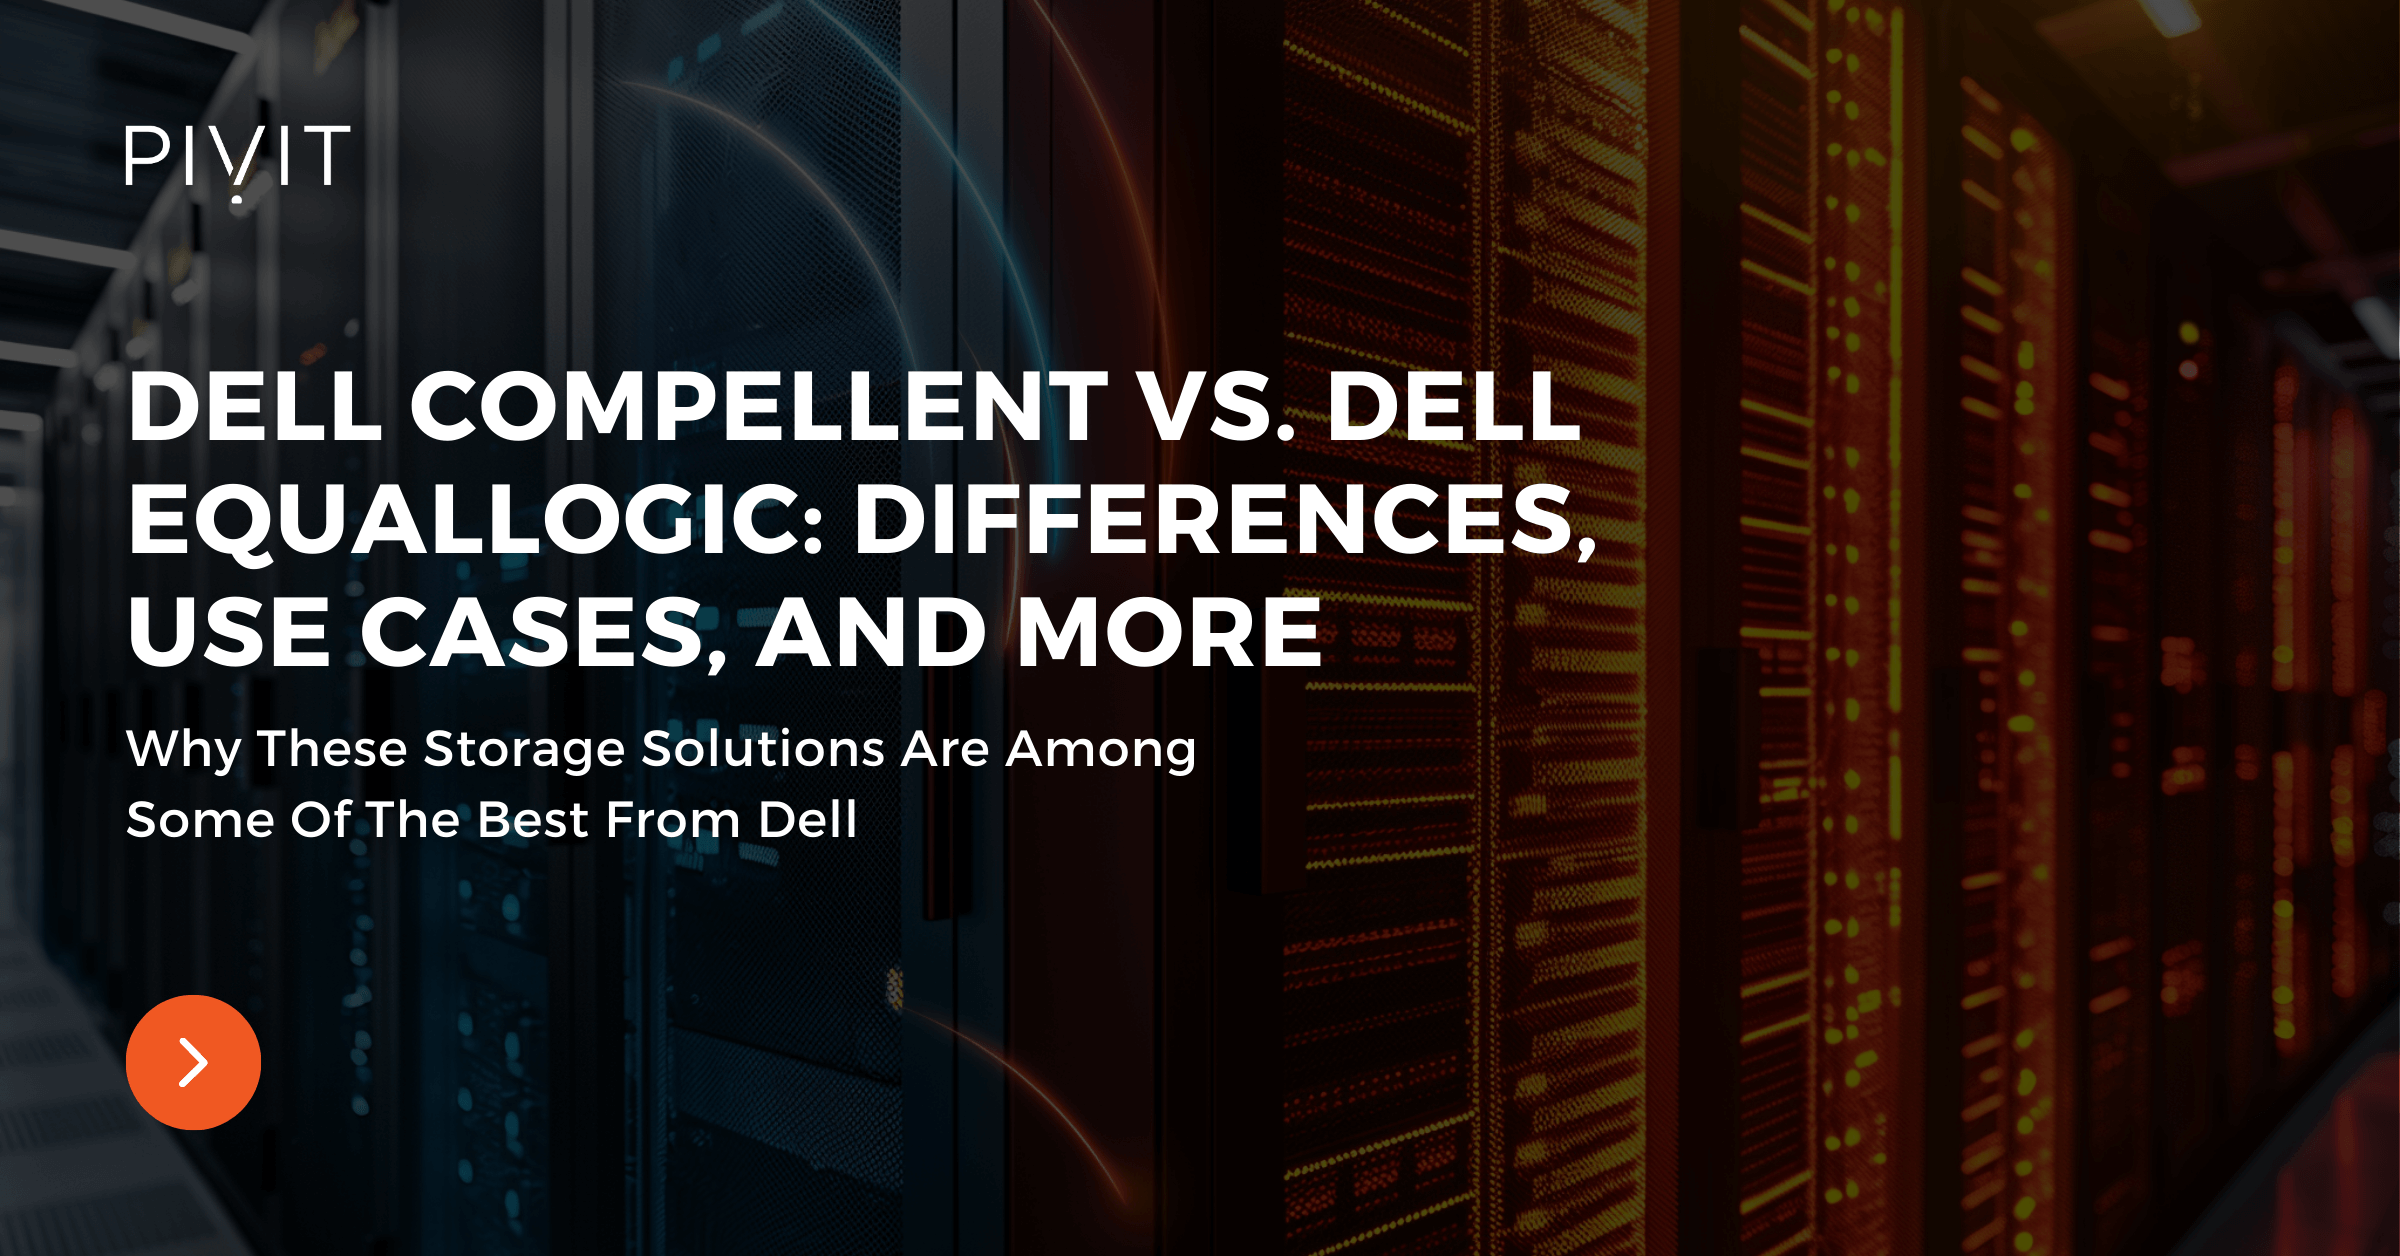 Dell Compellent Vs. Dell EqualLogic: Differences, Use Cases, And More - Why These Storage Solutions Are Among Some Of The Best From Dell